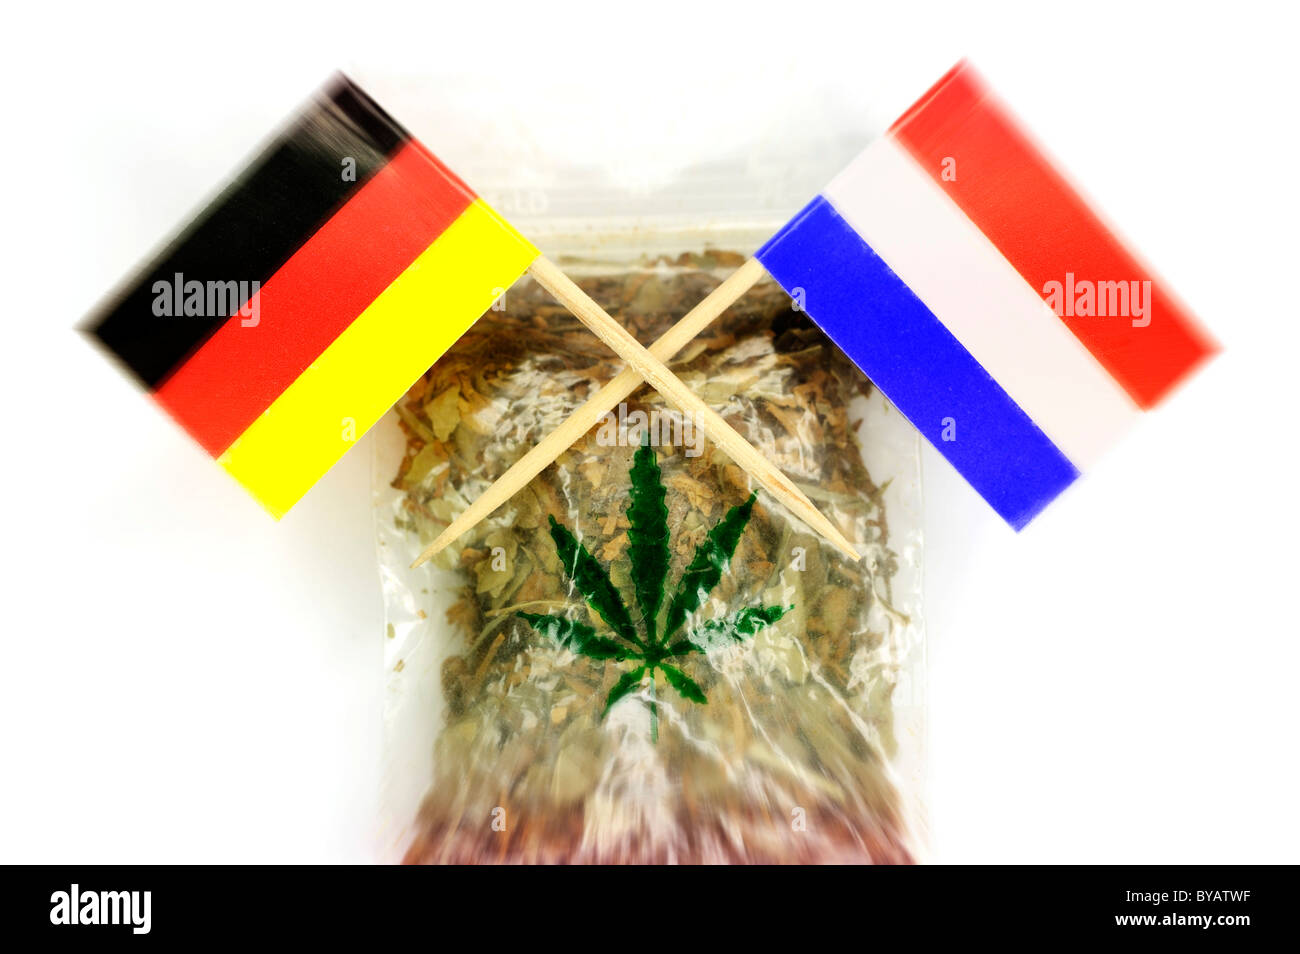 Bag of marijuana with the flags of Germany and the Netherlands, symbolic image Stock Photo